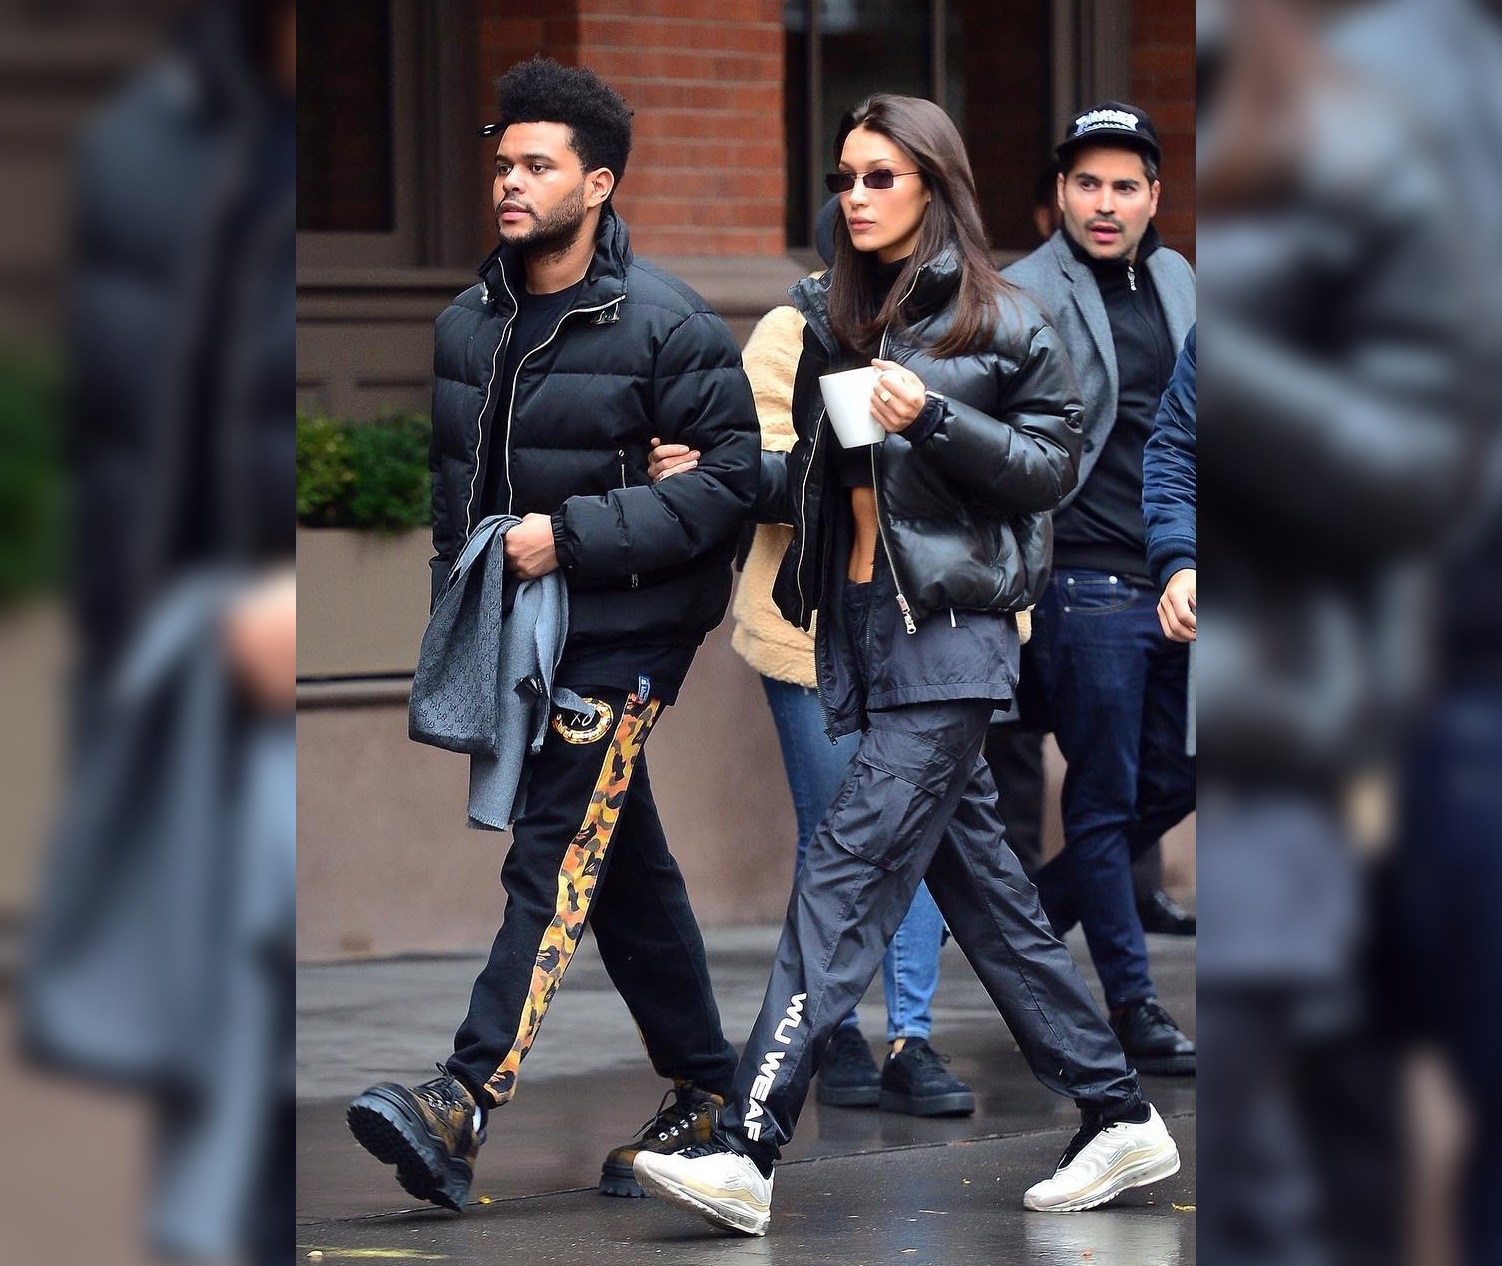 SPOTTED: The Weeknd and Bella Hadid Go Sleek with Wu Tang, BAPE, Nike and More